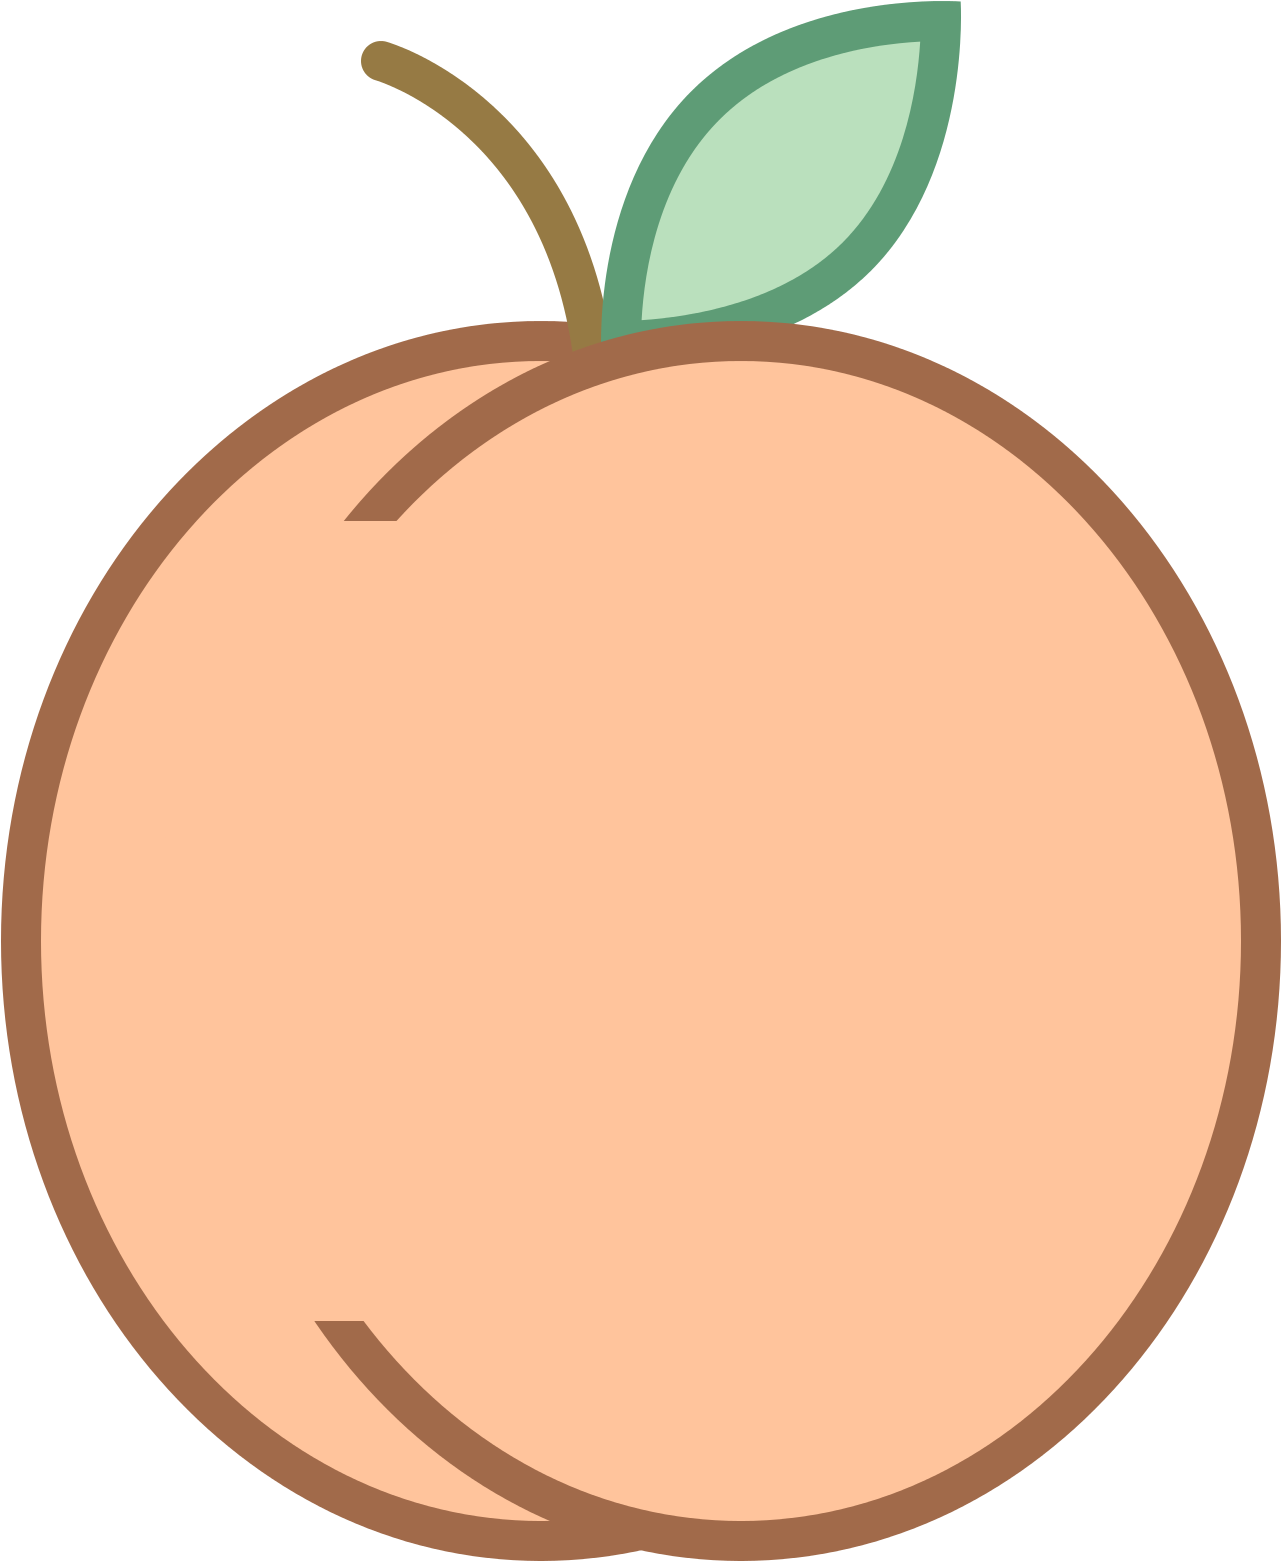 More From My Site - Transparent Peach Cartoon (1600x1600)